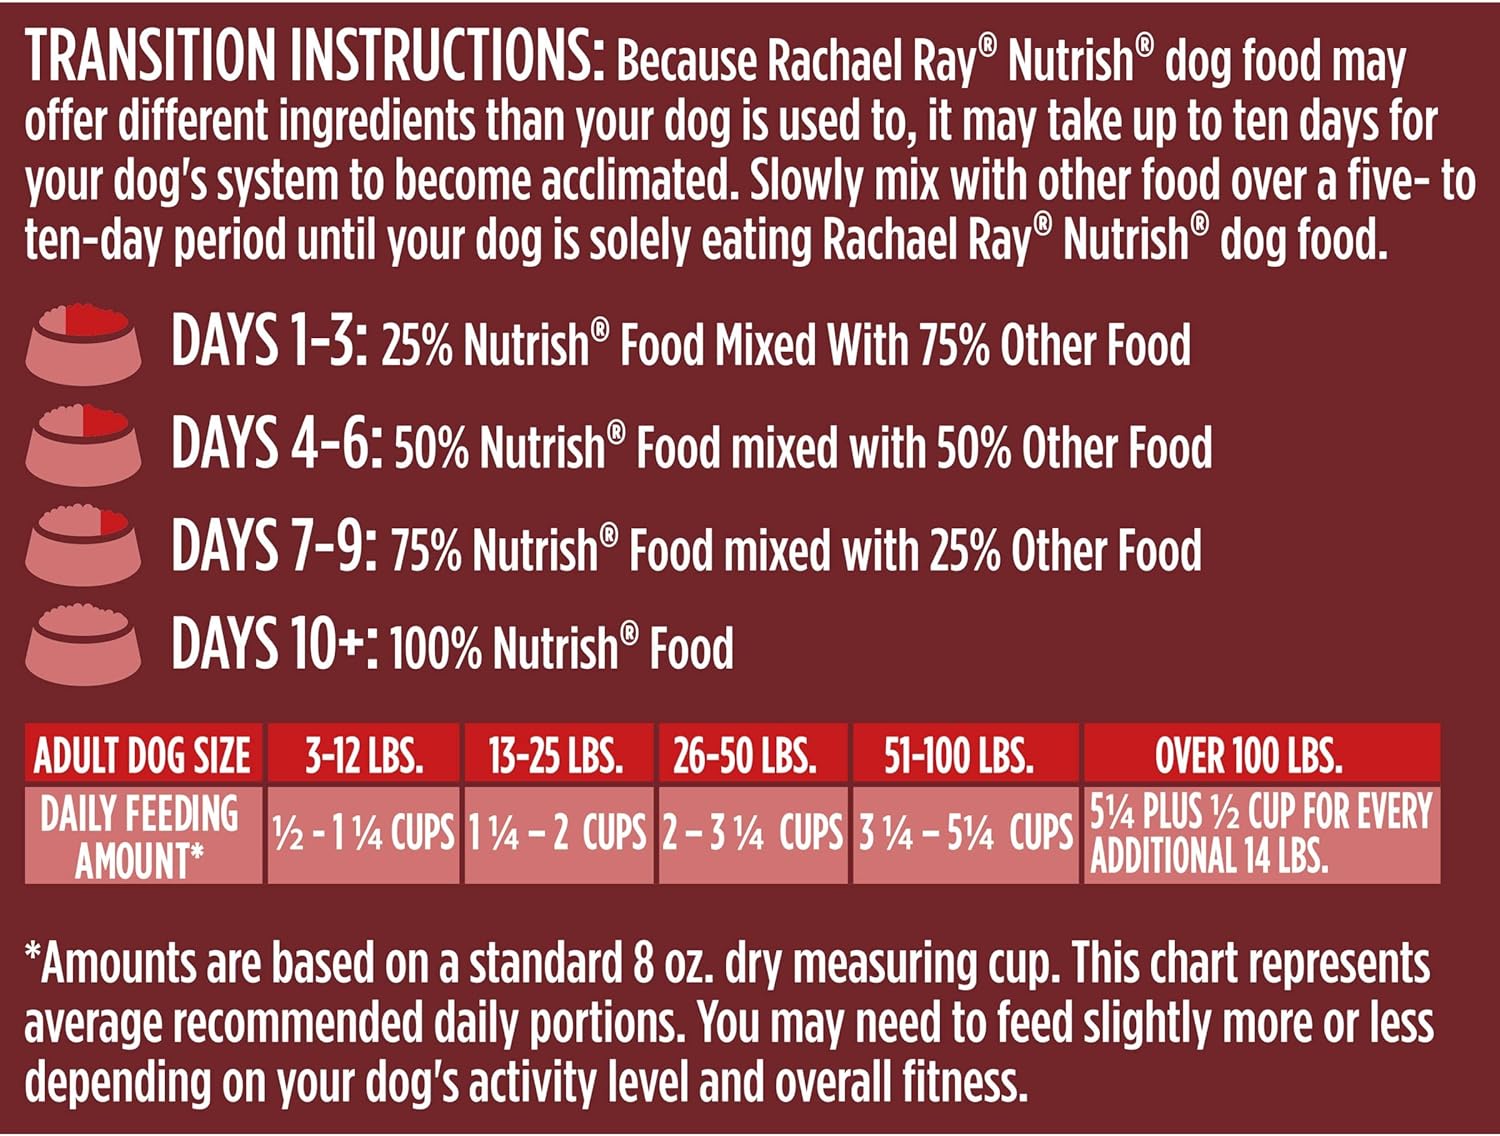 Wholesale prices with free shipping all over United States Rachael Ray Nutrish Dish Premium Dry Dog Food, Beef & Brown Rice Recipe with Veggies, Fruit & Chicken, 11.5 Pound Bag - Steven Deals